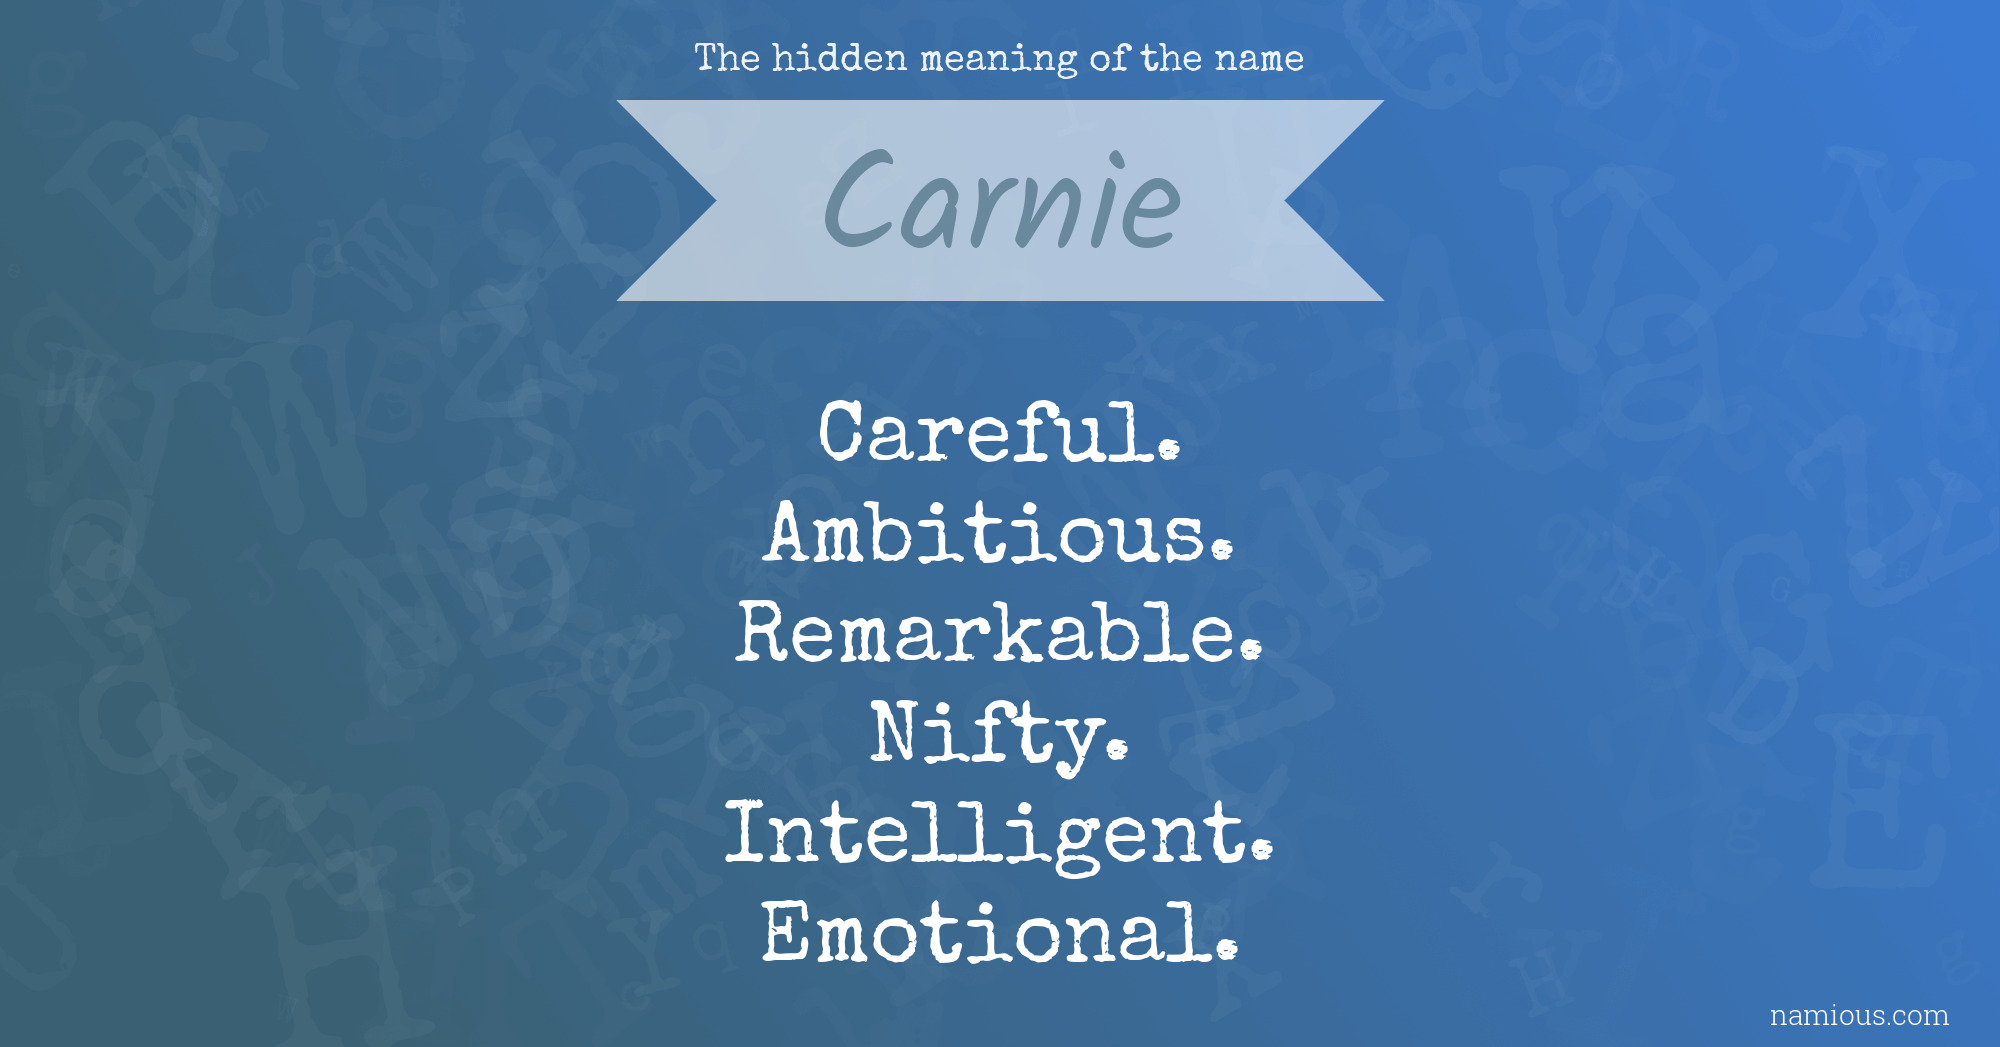 The hidden meaning of the name Carnie